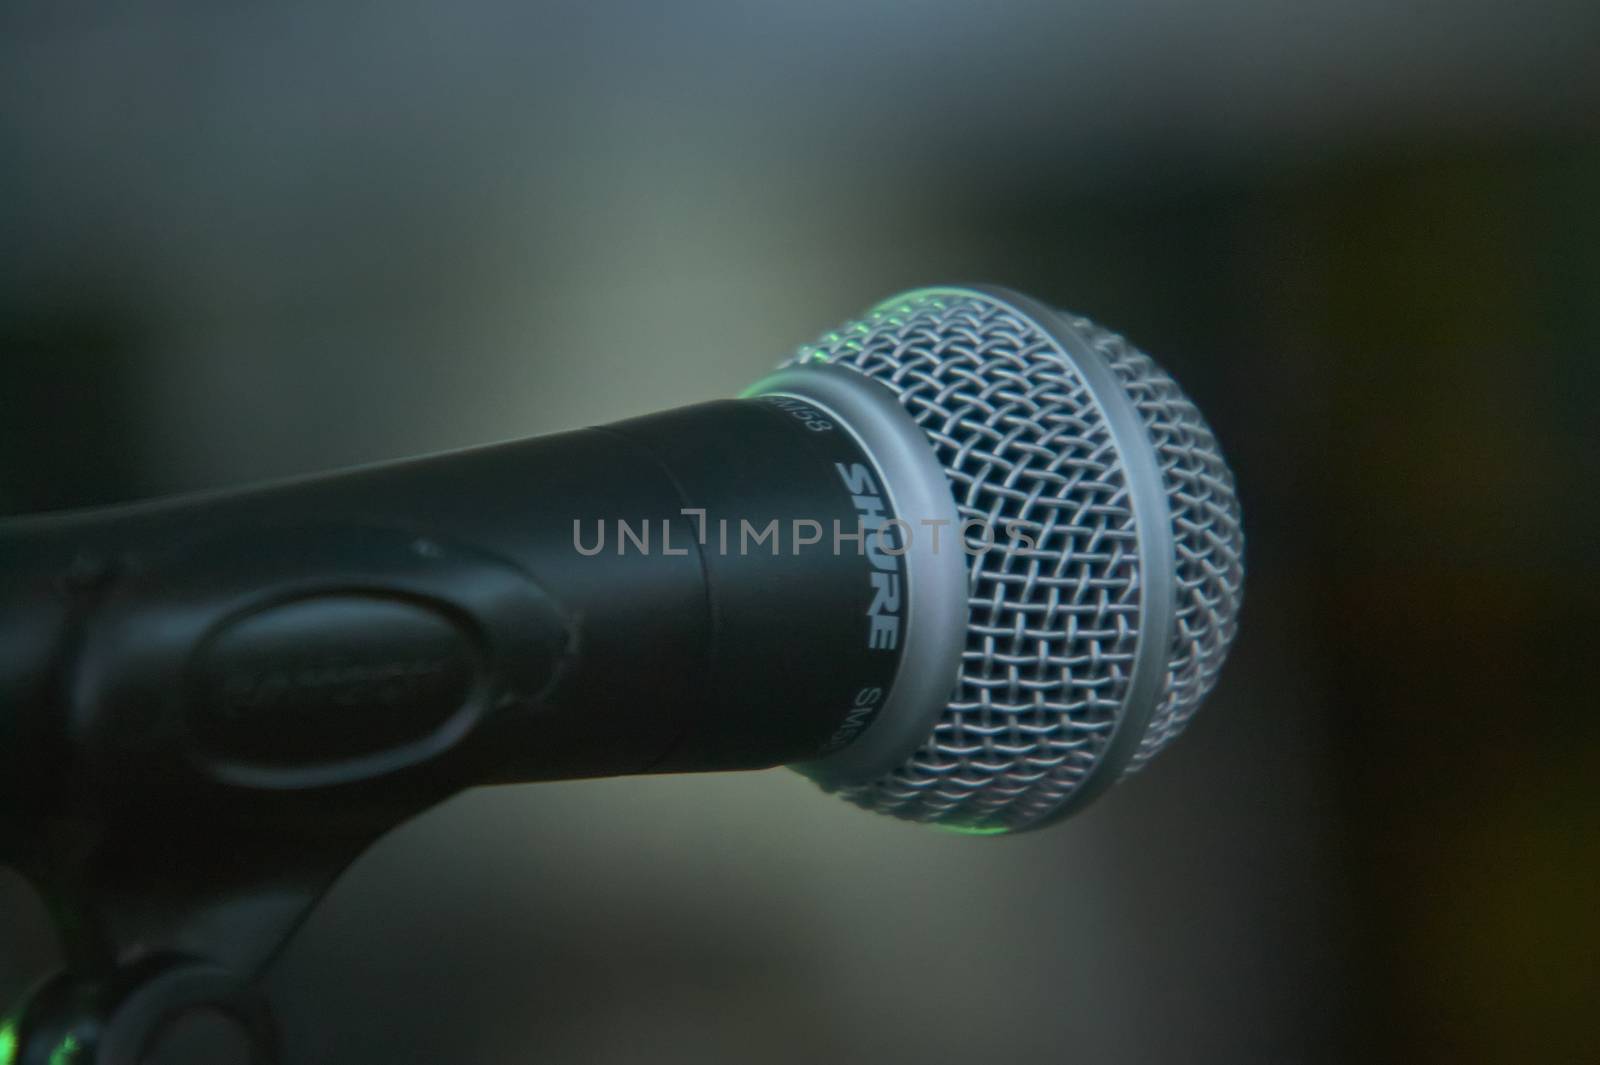 Detail of a microphone for singing taken in front view (view of the singer) with the background completely blurred. Useful as a graphical resource.